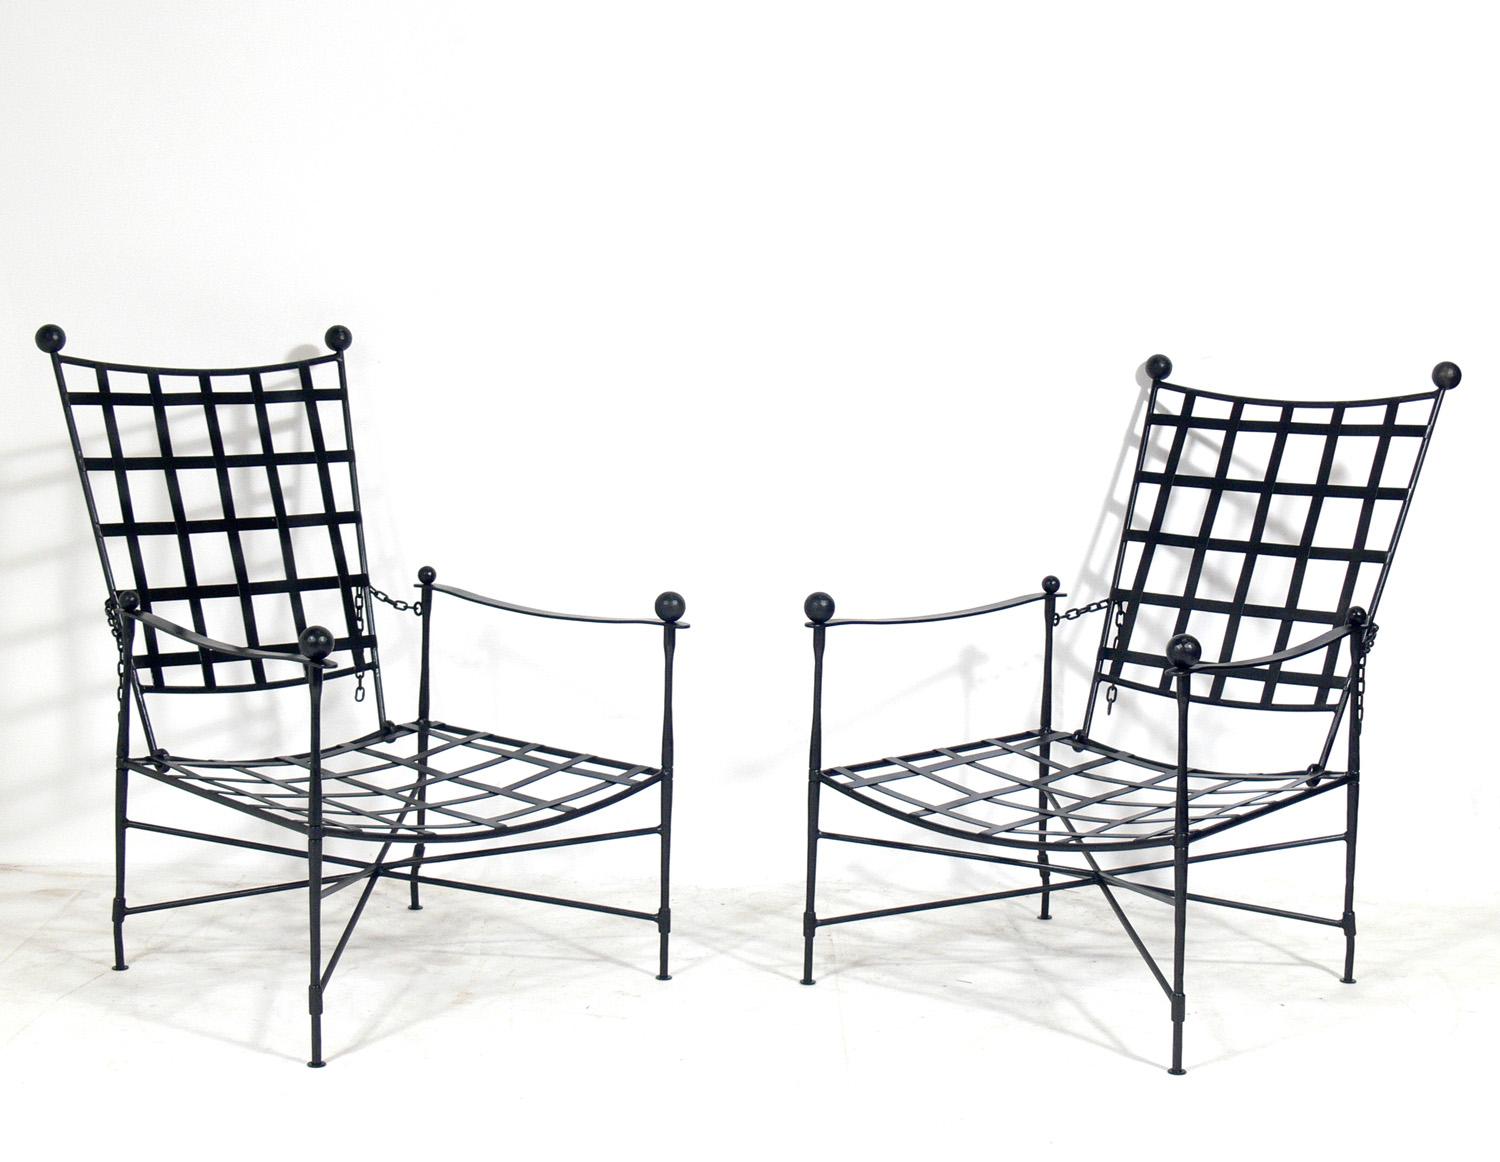 Pair of iron lounge chairs and single ottoman, design attributed to Mario Papperzini for Salterini, Italian, circa 1950s. This is a versatile form and it can be used indoors or outdoors. This sculptural chair design was used by Yves Saint Laurent in